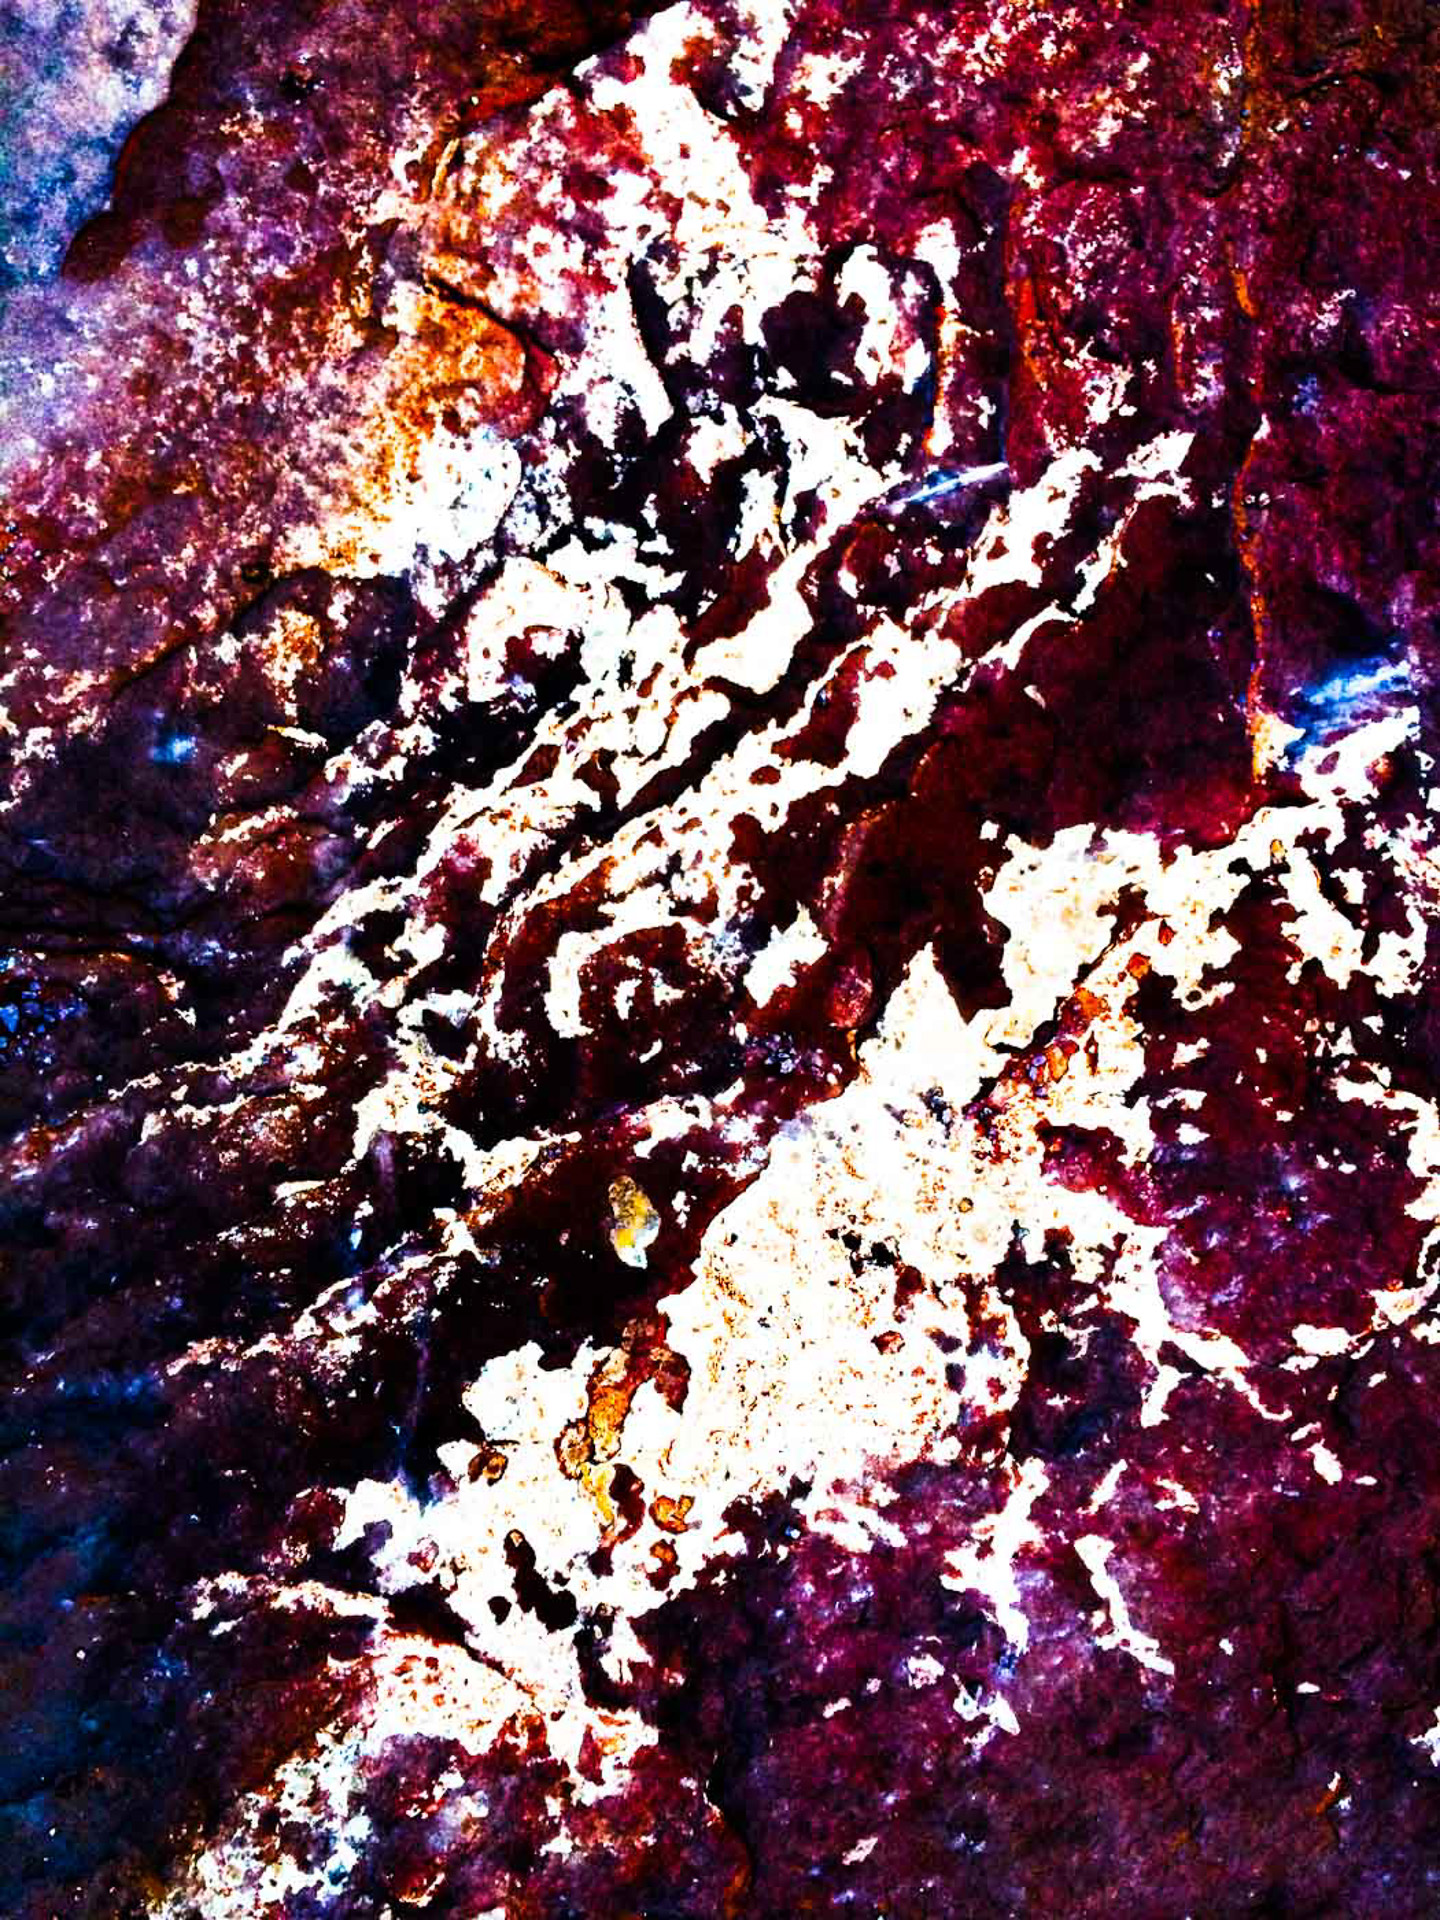 Conceptual Art, Blog, picture of a rock with purple and blue tones